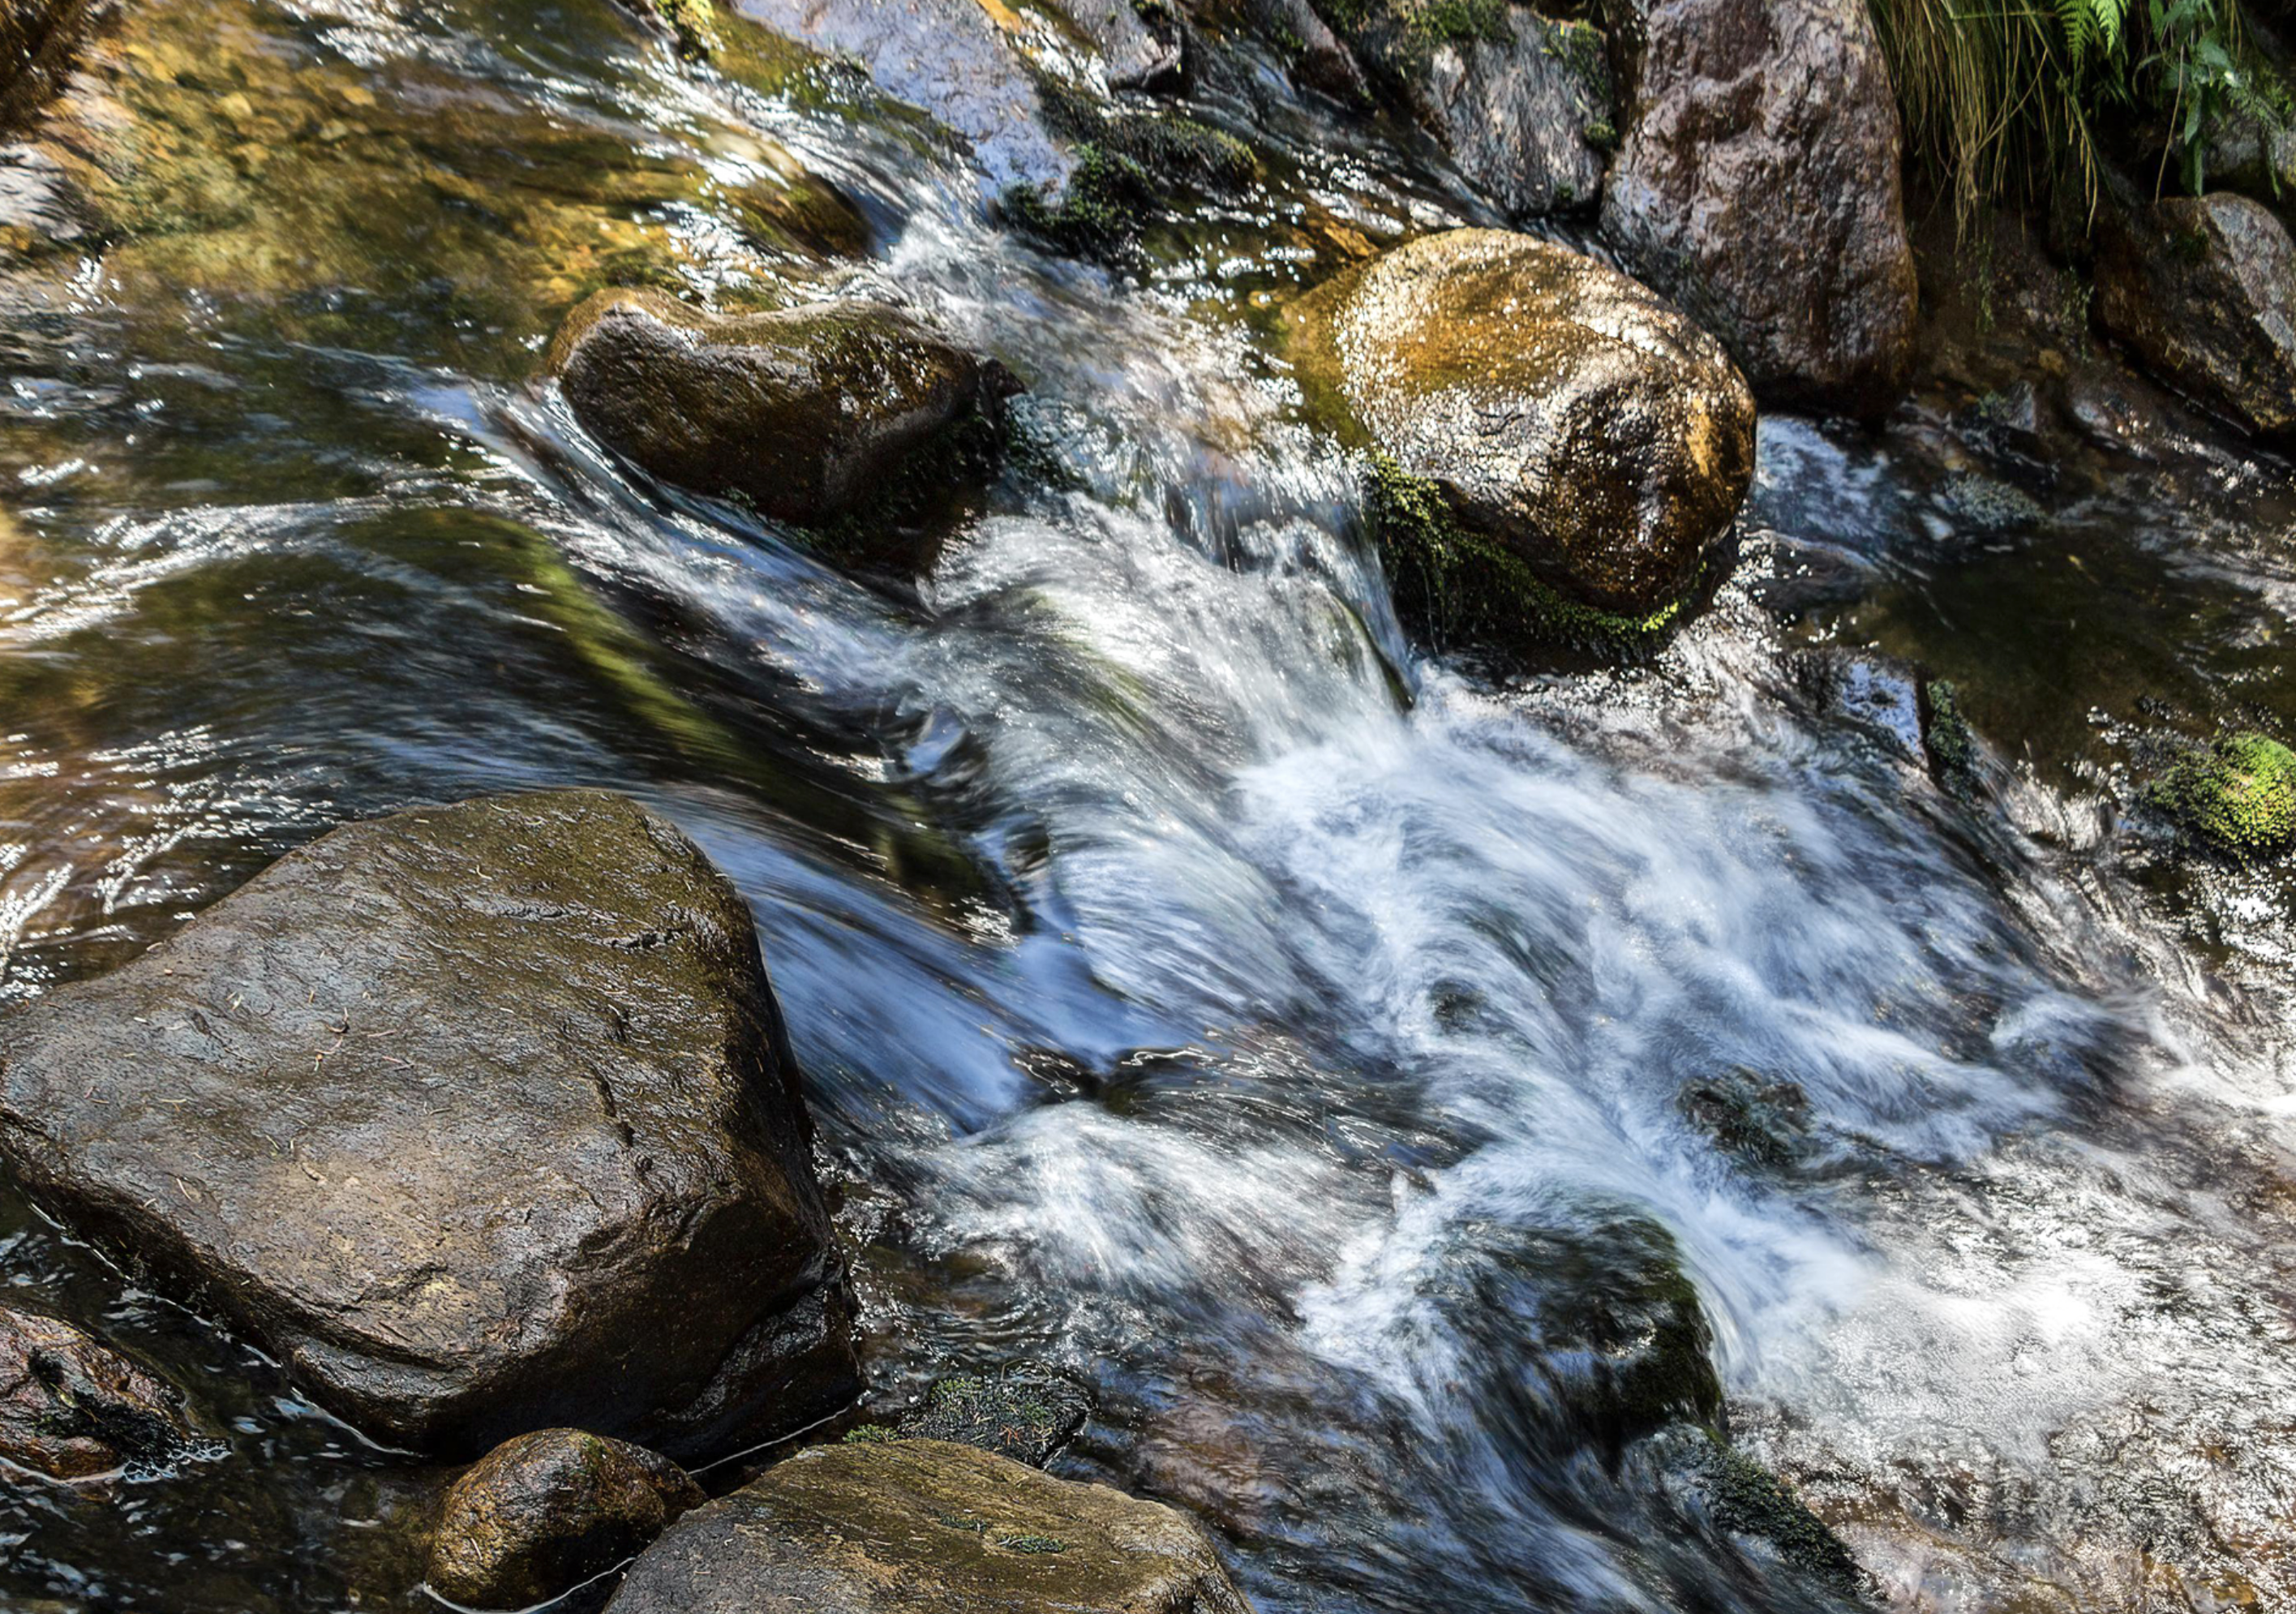 water moving quickly around rocks in a stream